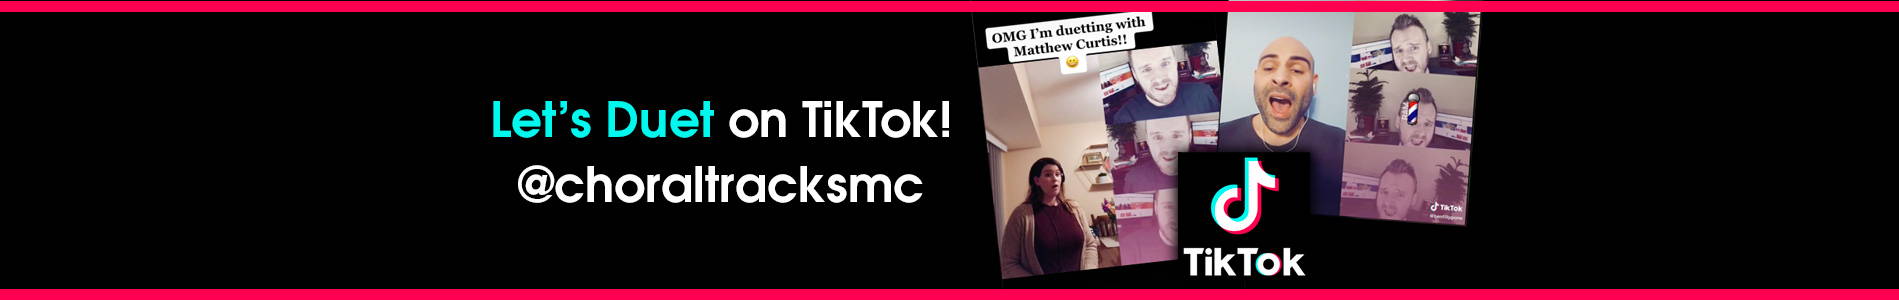 Follow Choral Tracks and Duet with Matthew Curtis on TikTok